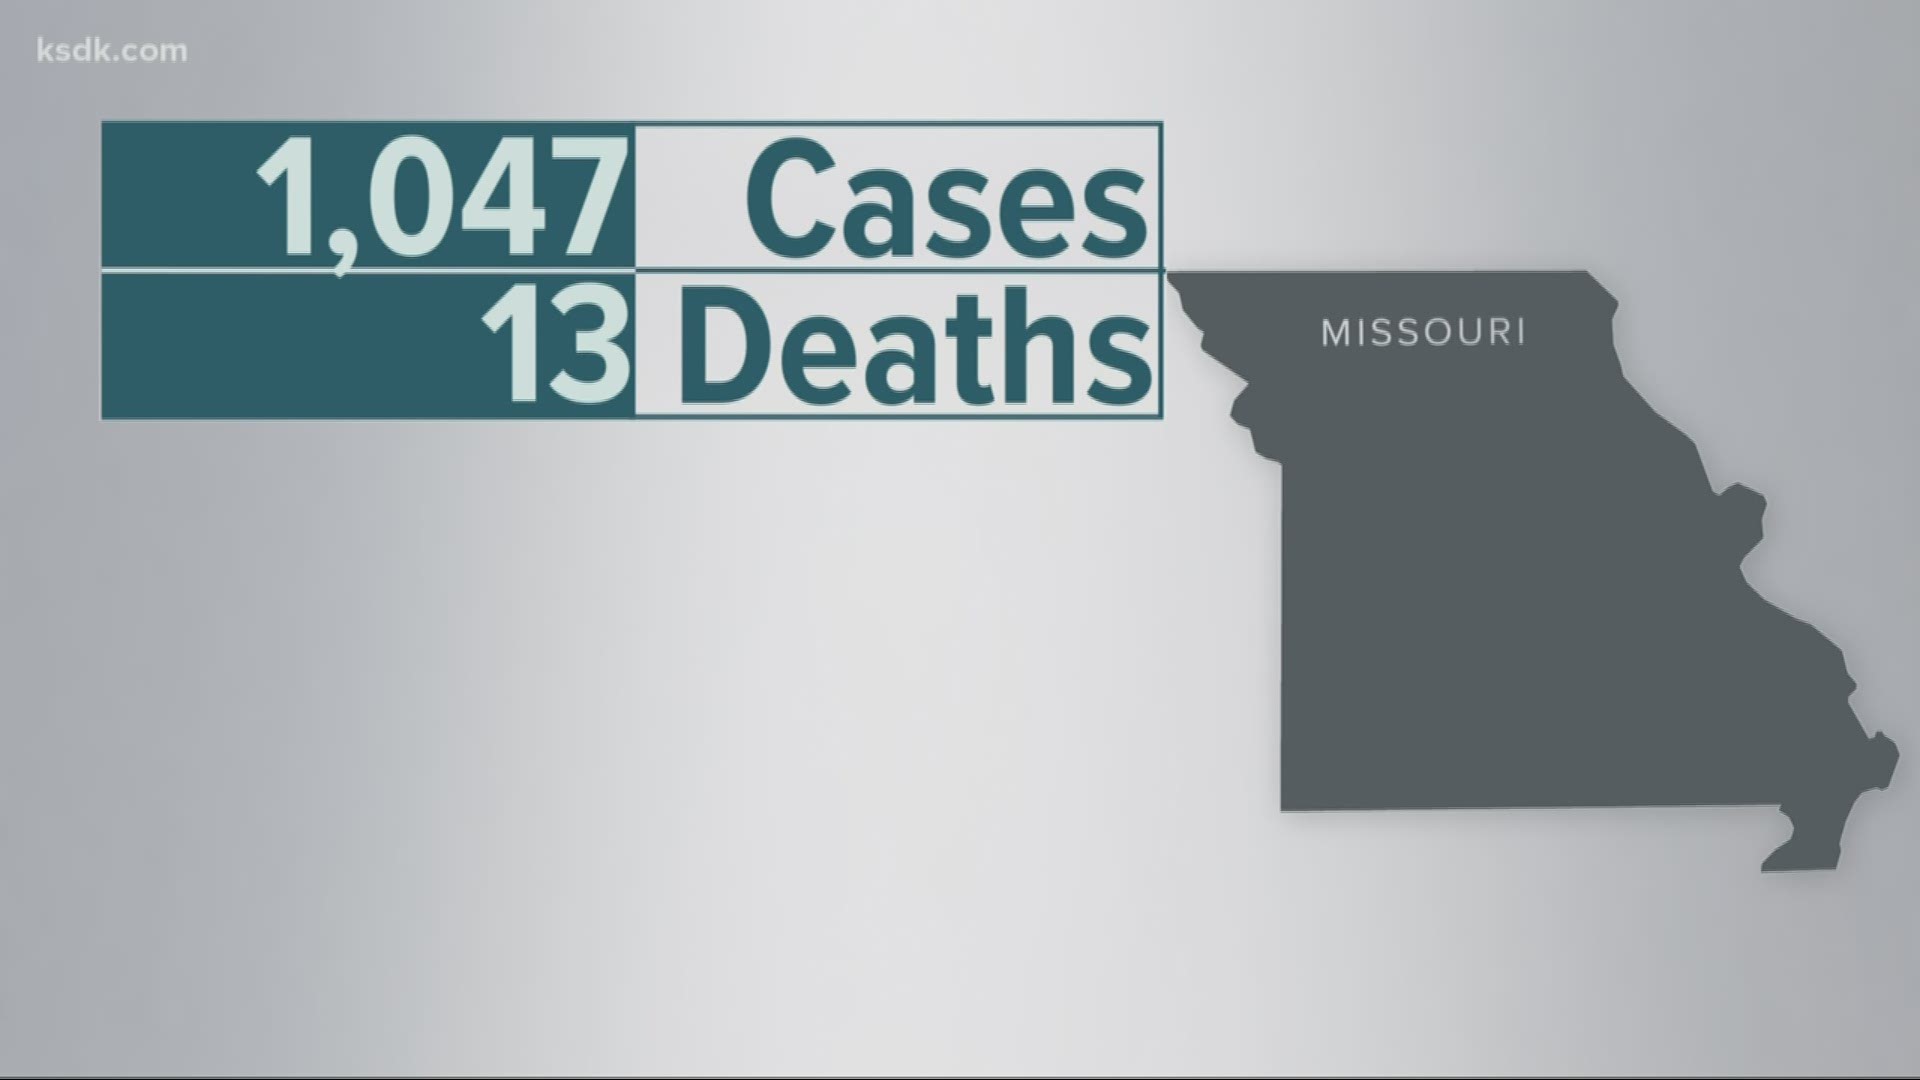 5 On Your Side has the latest on the number of confirmed coronavirus cases and deaths in Missouri and Illinois.